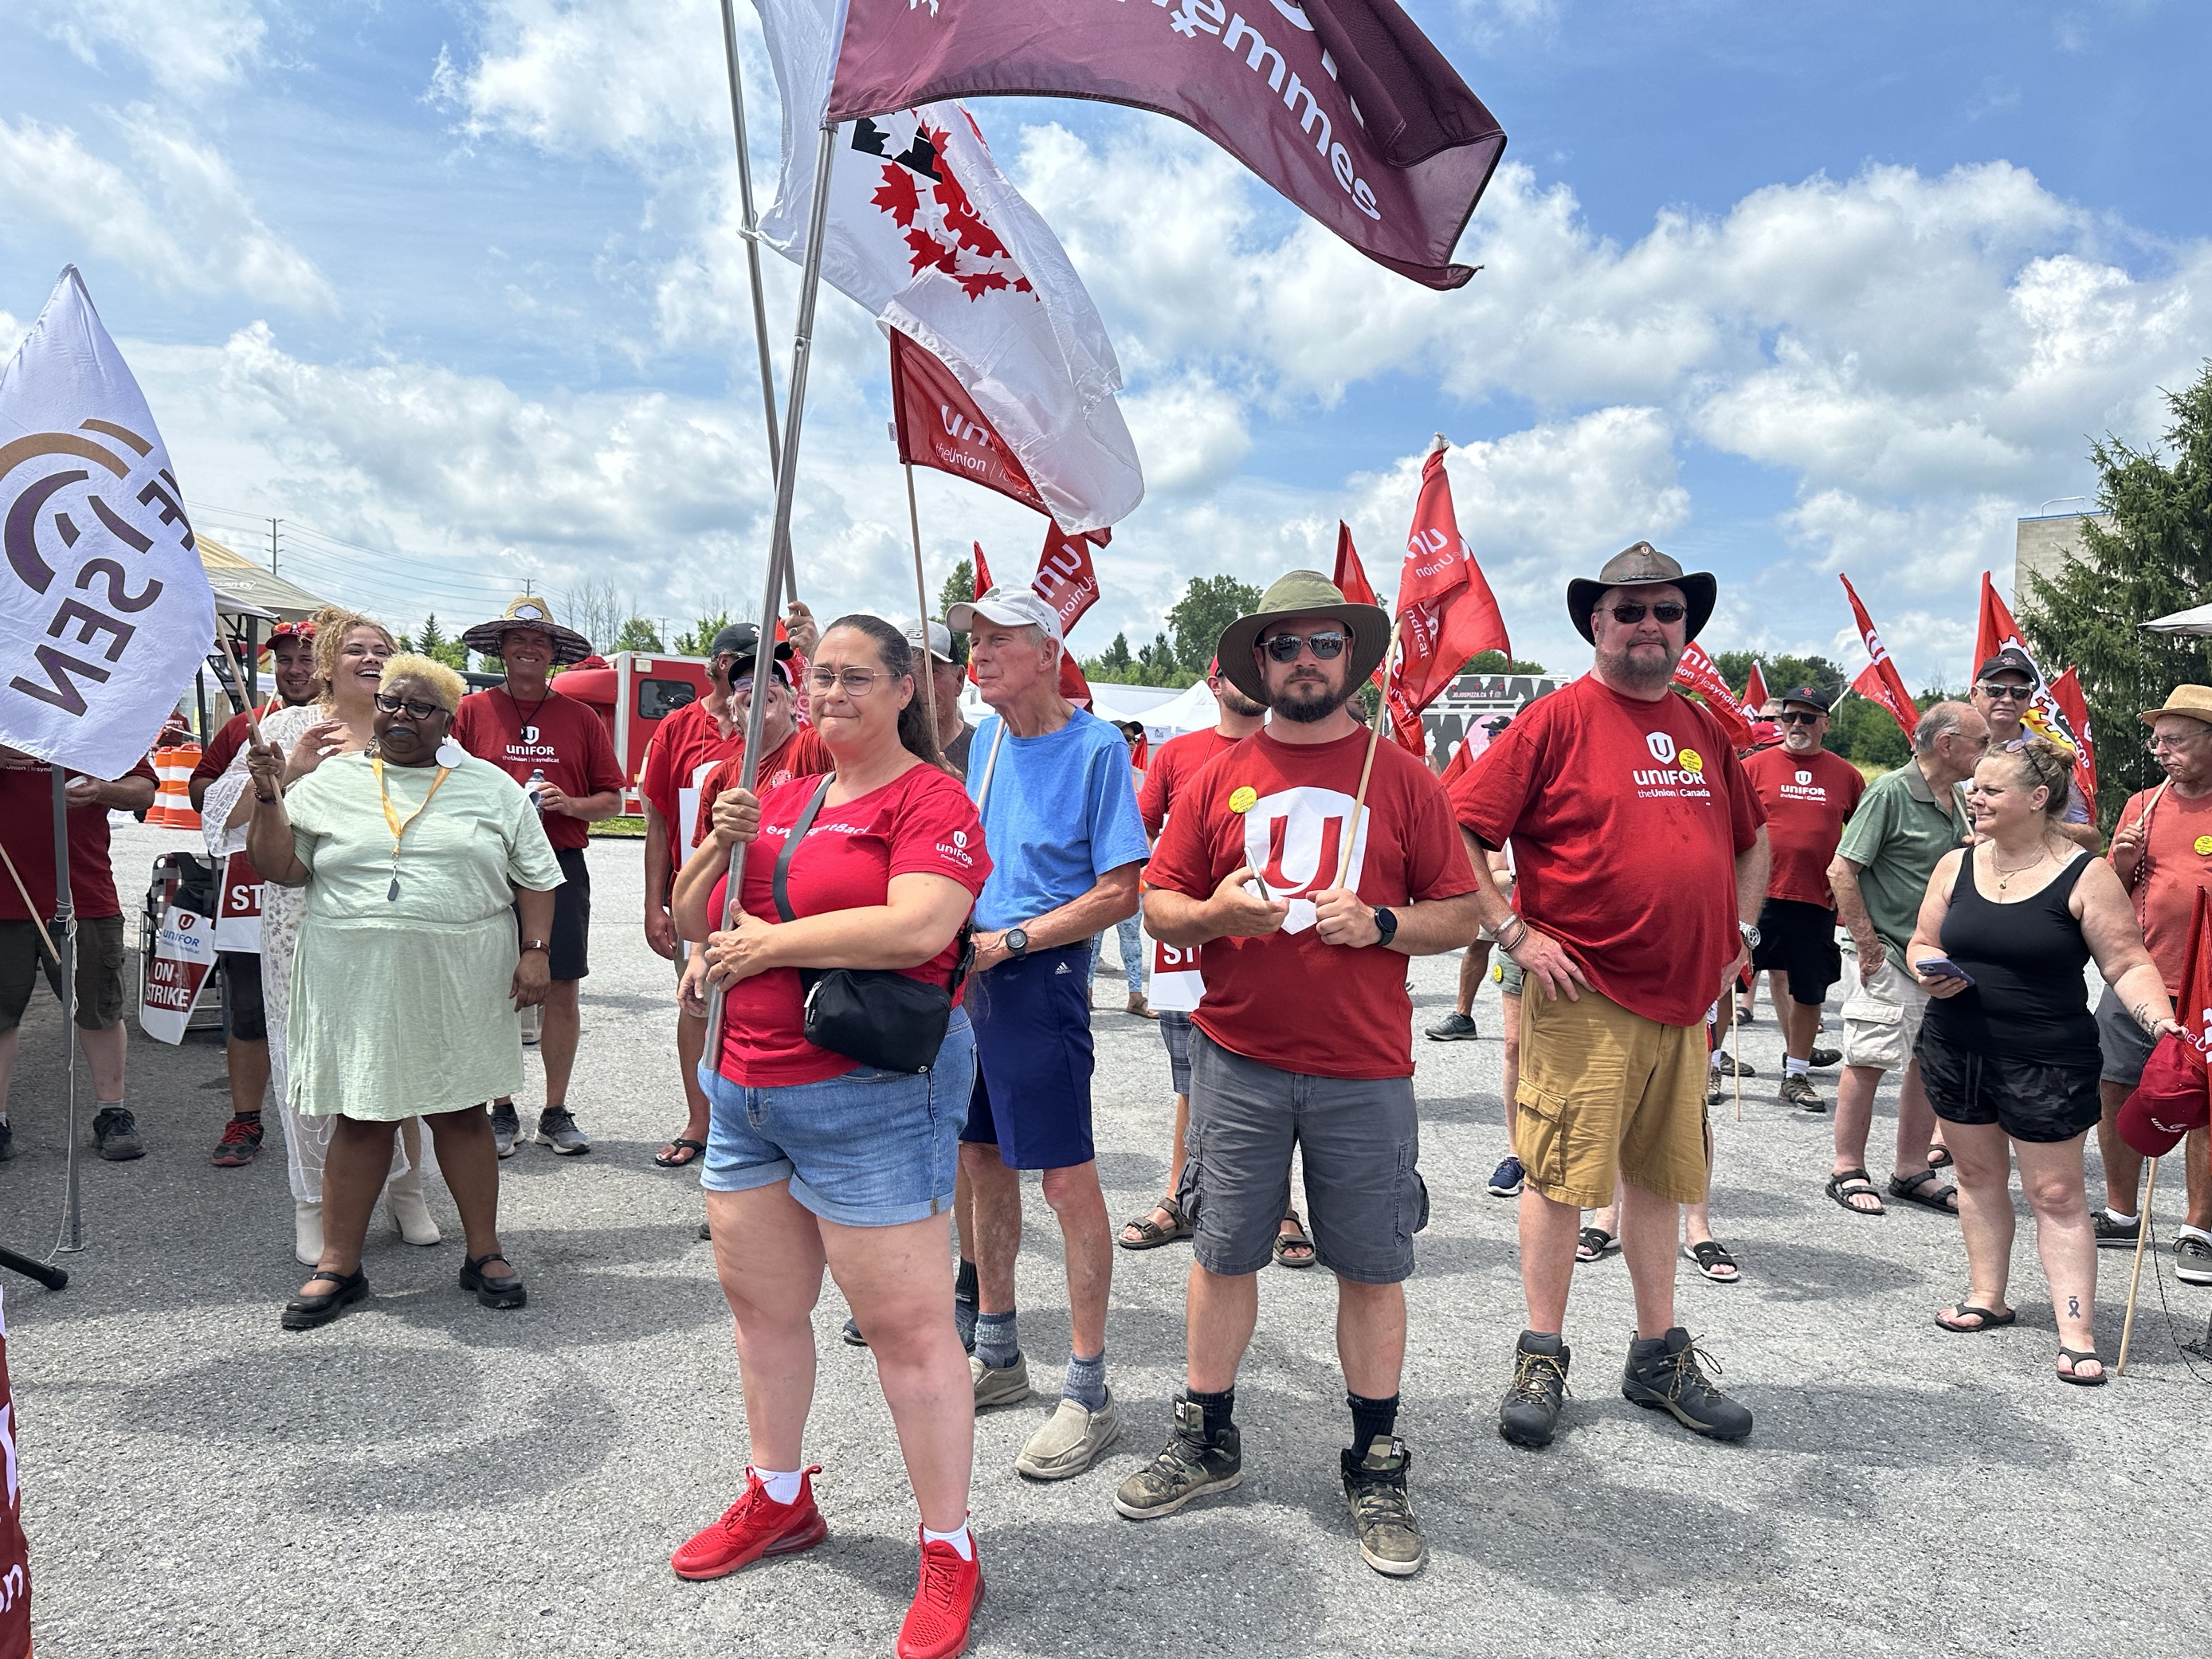 Group holding flags and wearing unifor shirts